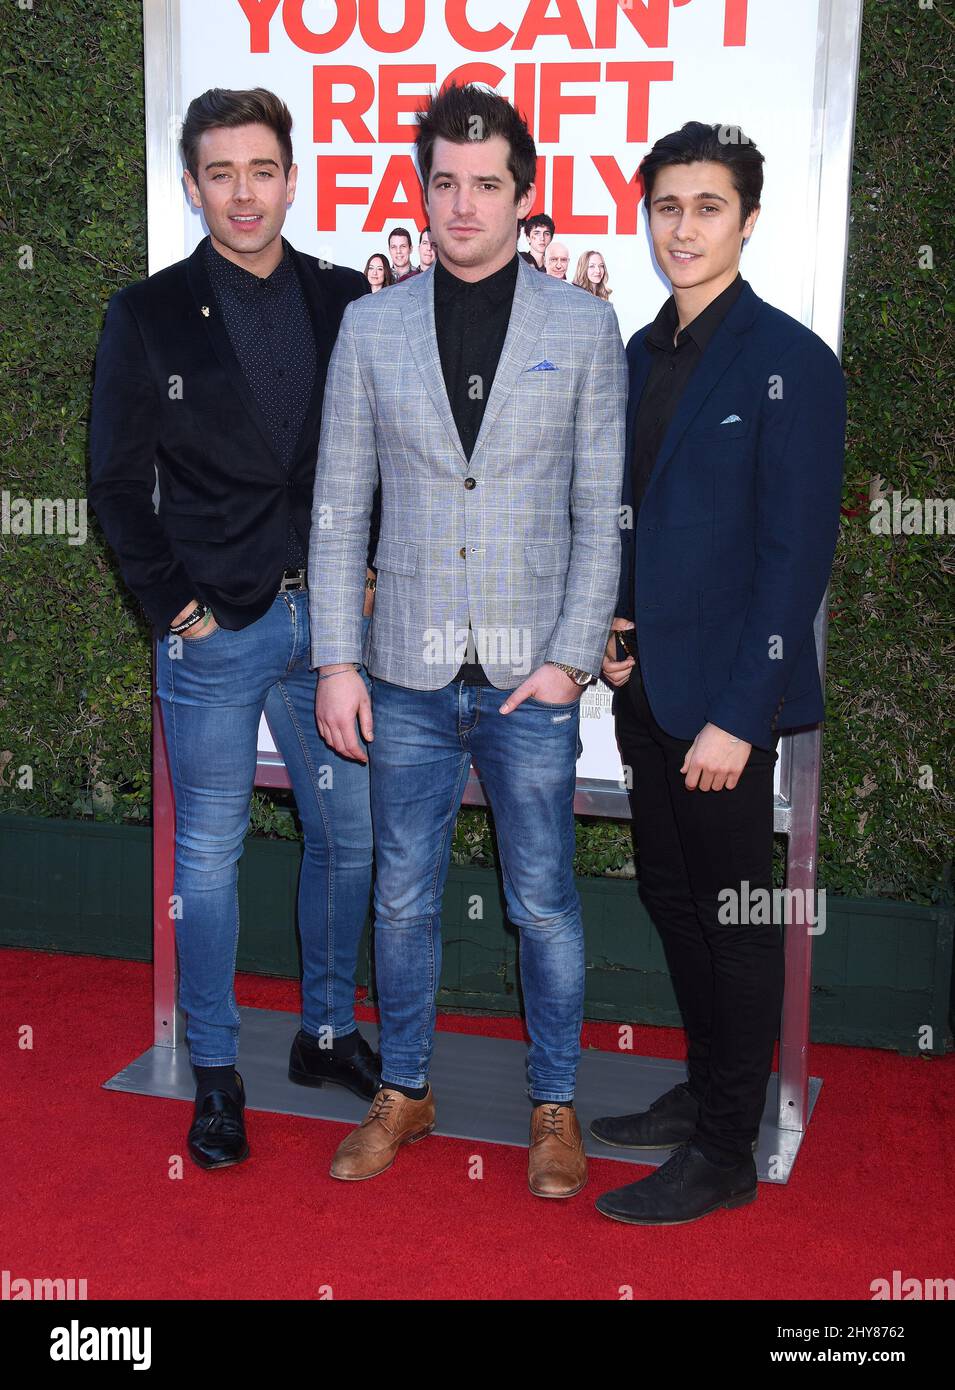 Kristofer James, Kyle Carpenter and Aleskey Lopez of The Scheme attending CBS Films' 'Love the Coopers' premiere held at Park Plaza at The Grove Stock Photo